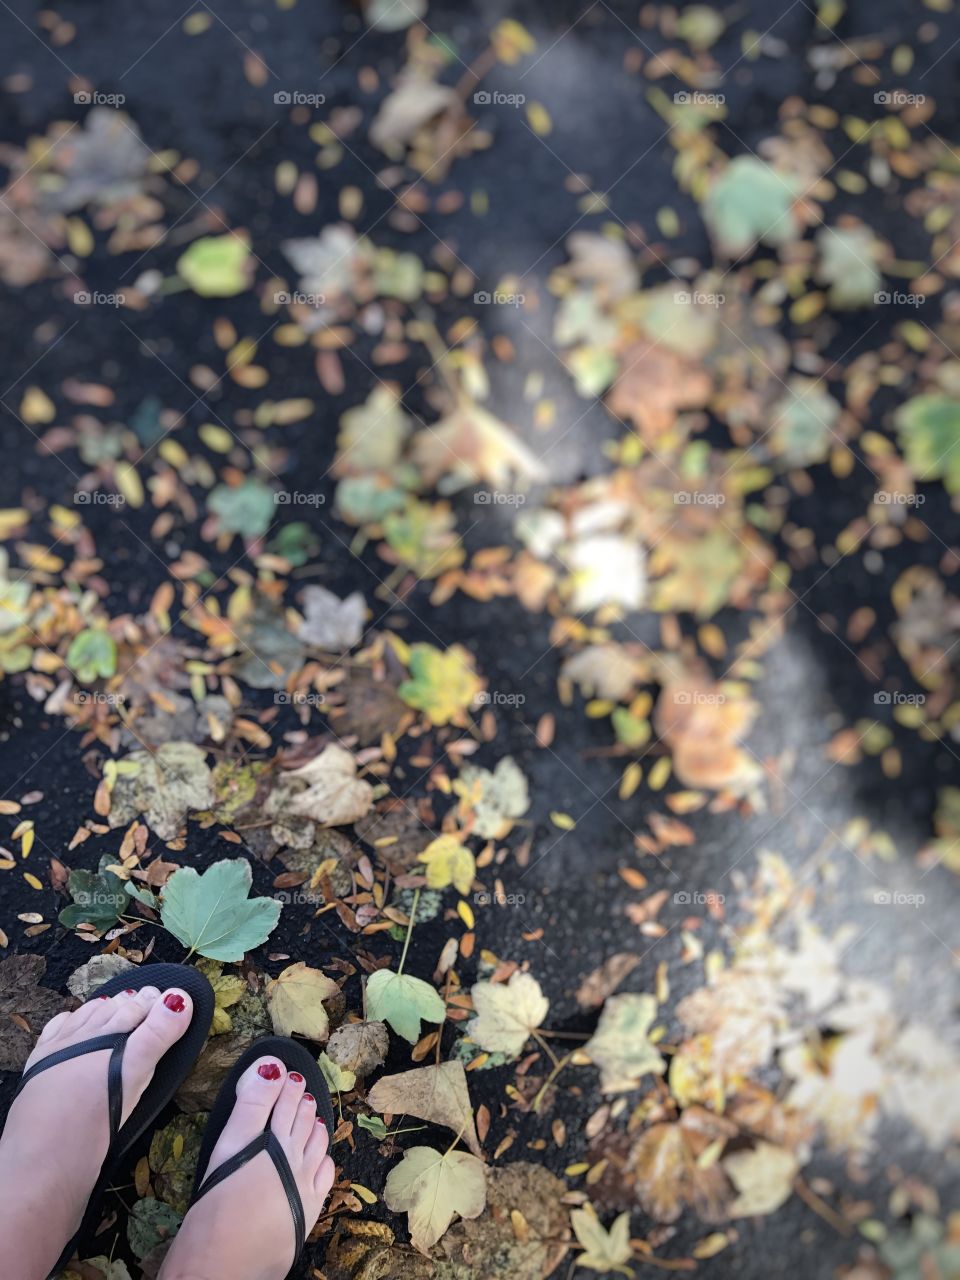 Walking home,  amongst the leaves on the city sidewalk in Moscow, Idaho.